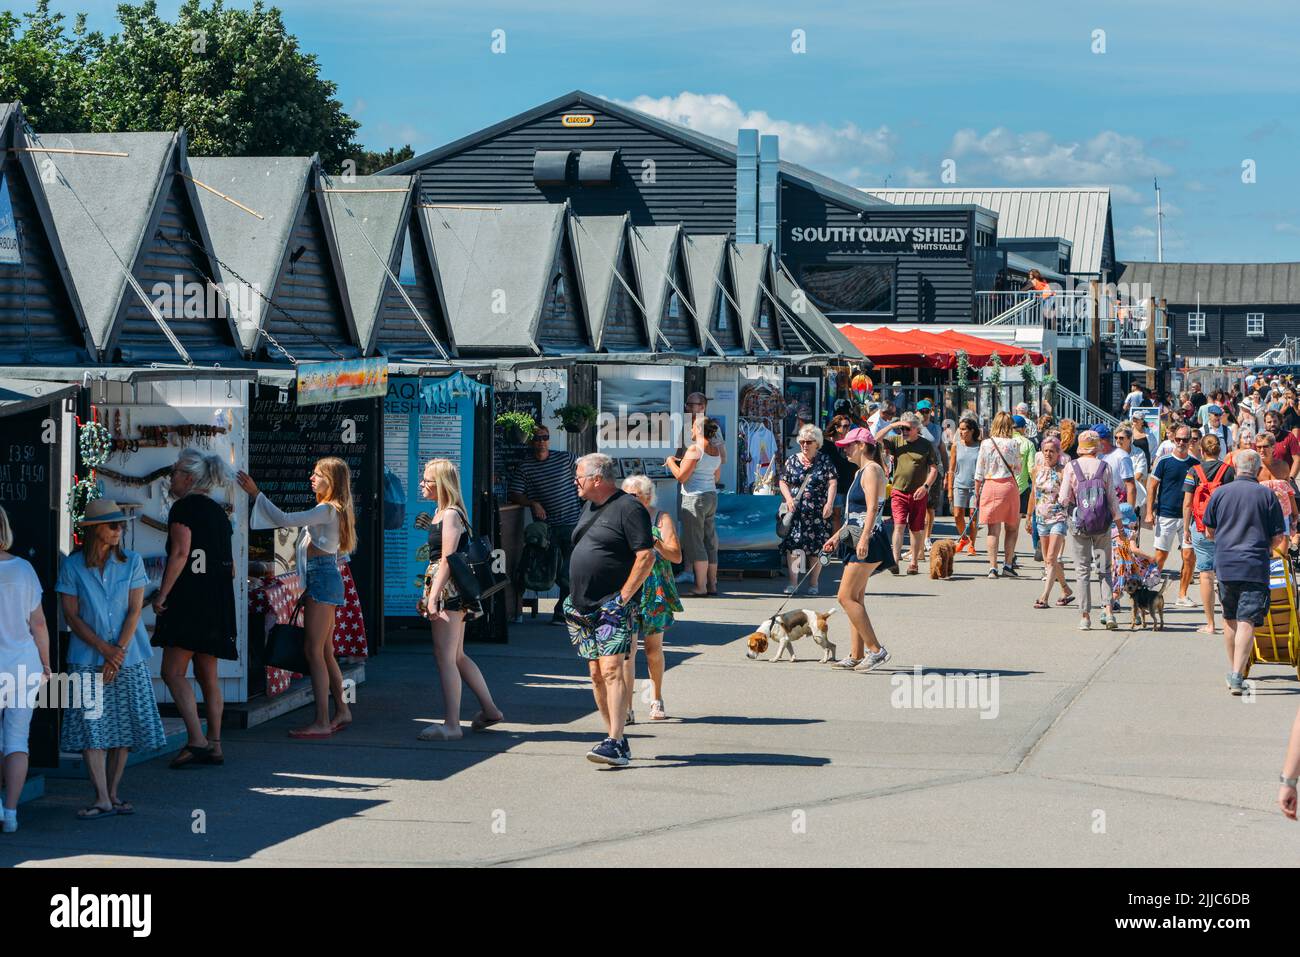 Whitstable, UK - July 16, 2022: Busy Whitstable harbour market on a summer day Stock Photo